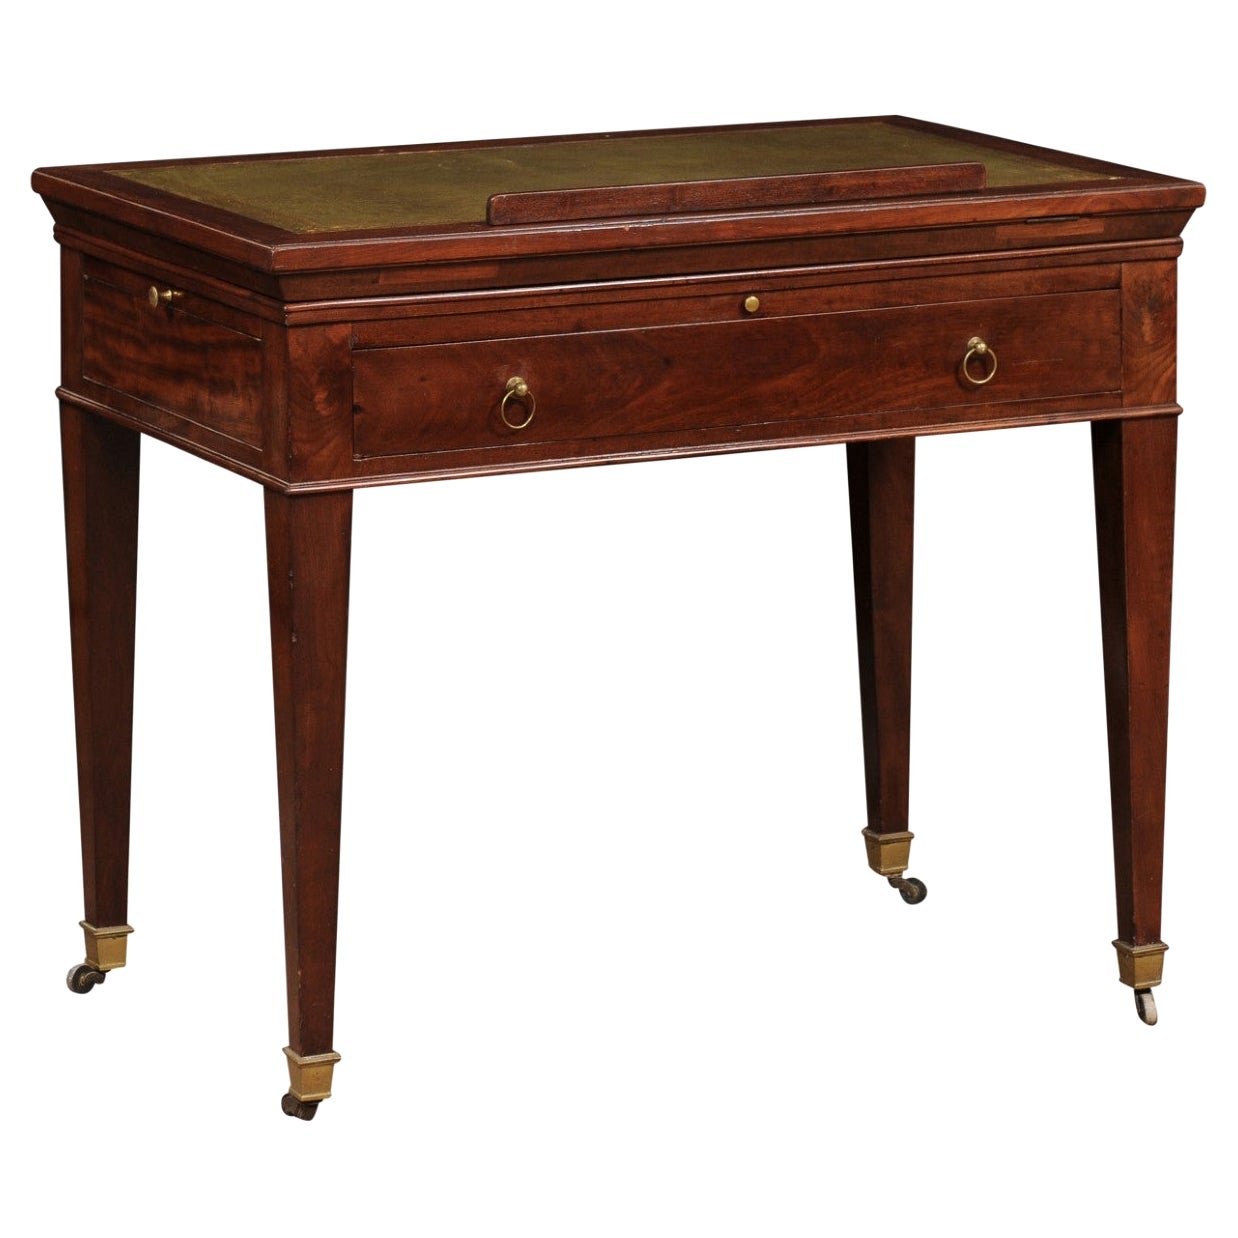 Louis XVI Mahogany Architect’s Desk with Leather Top, France ca. 1800